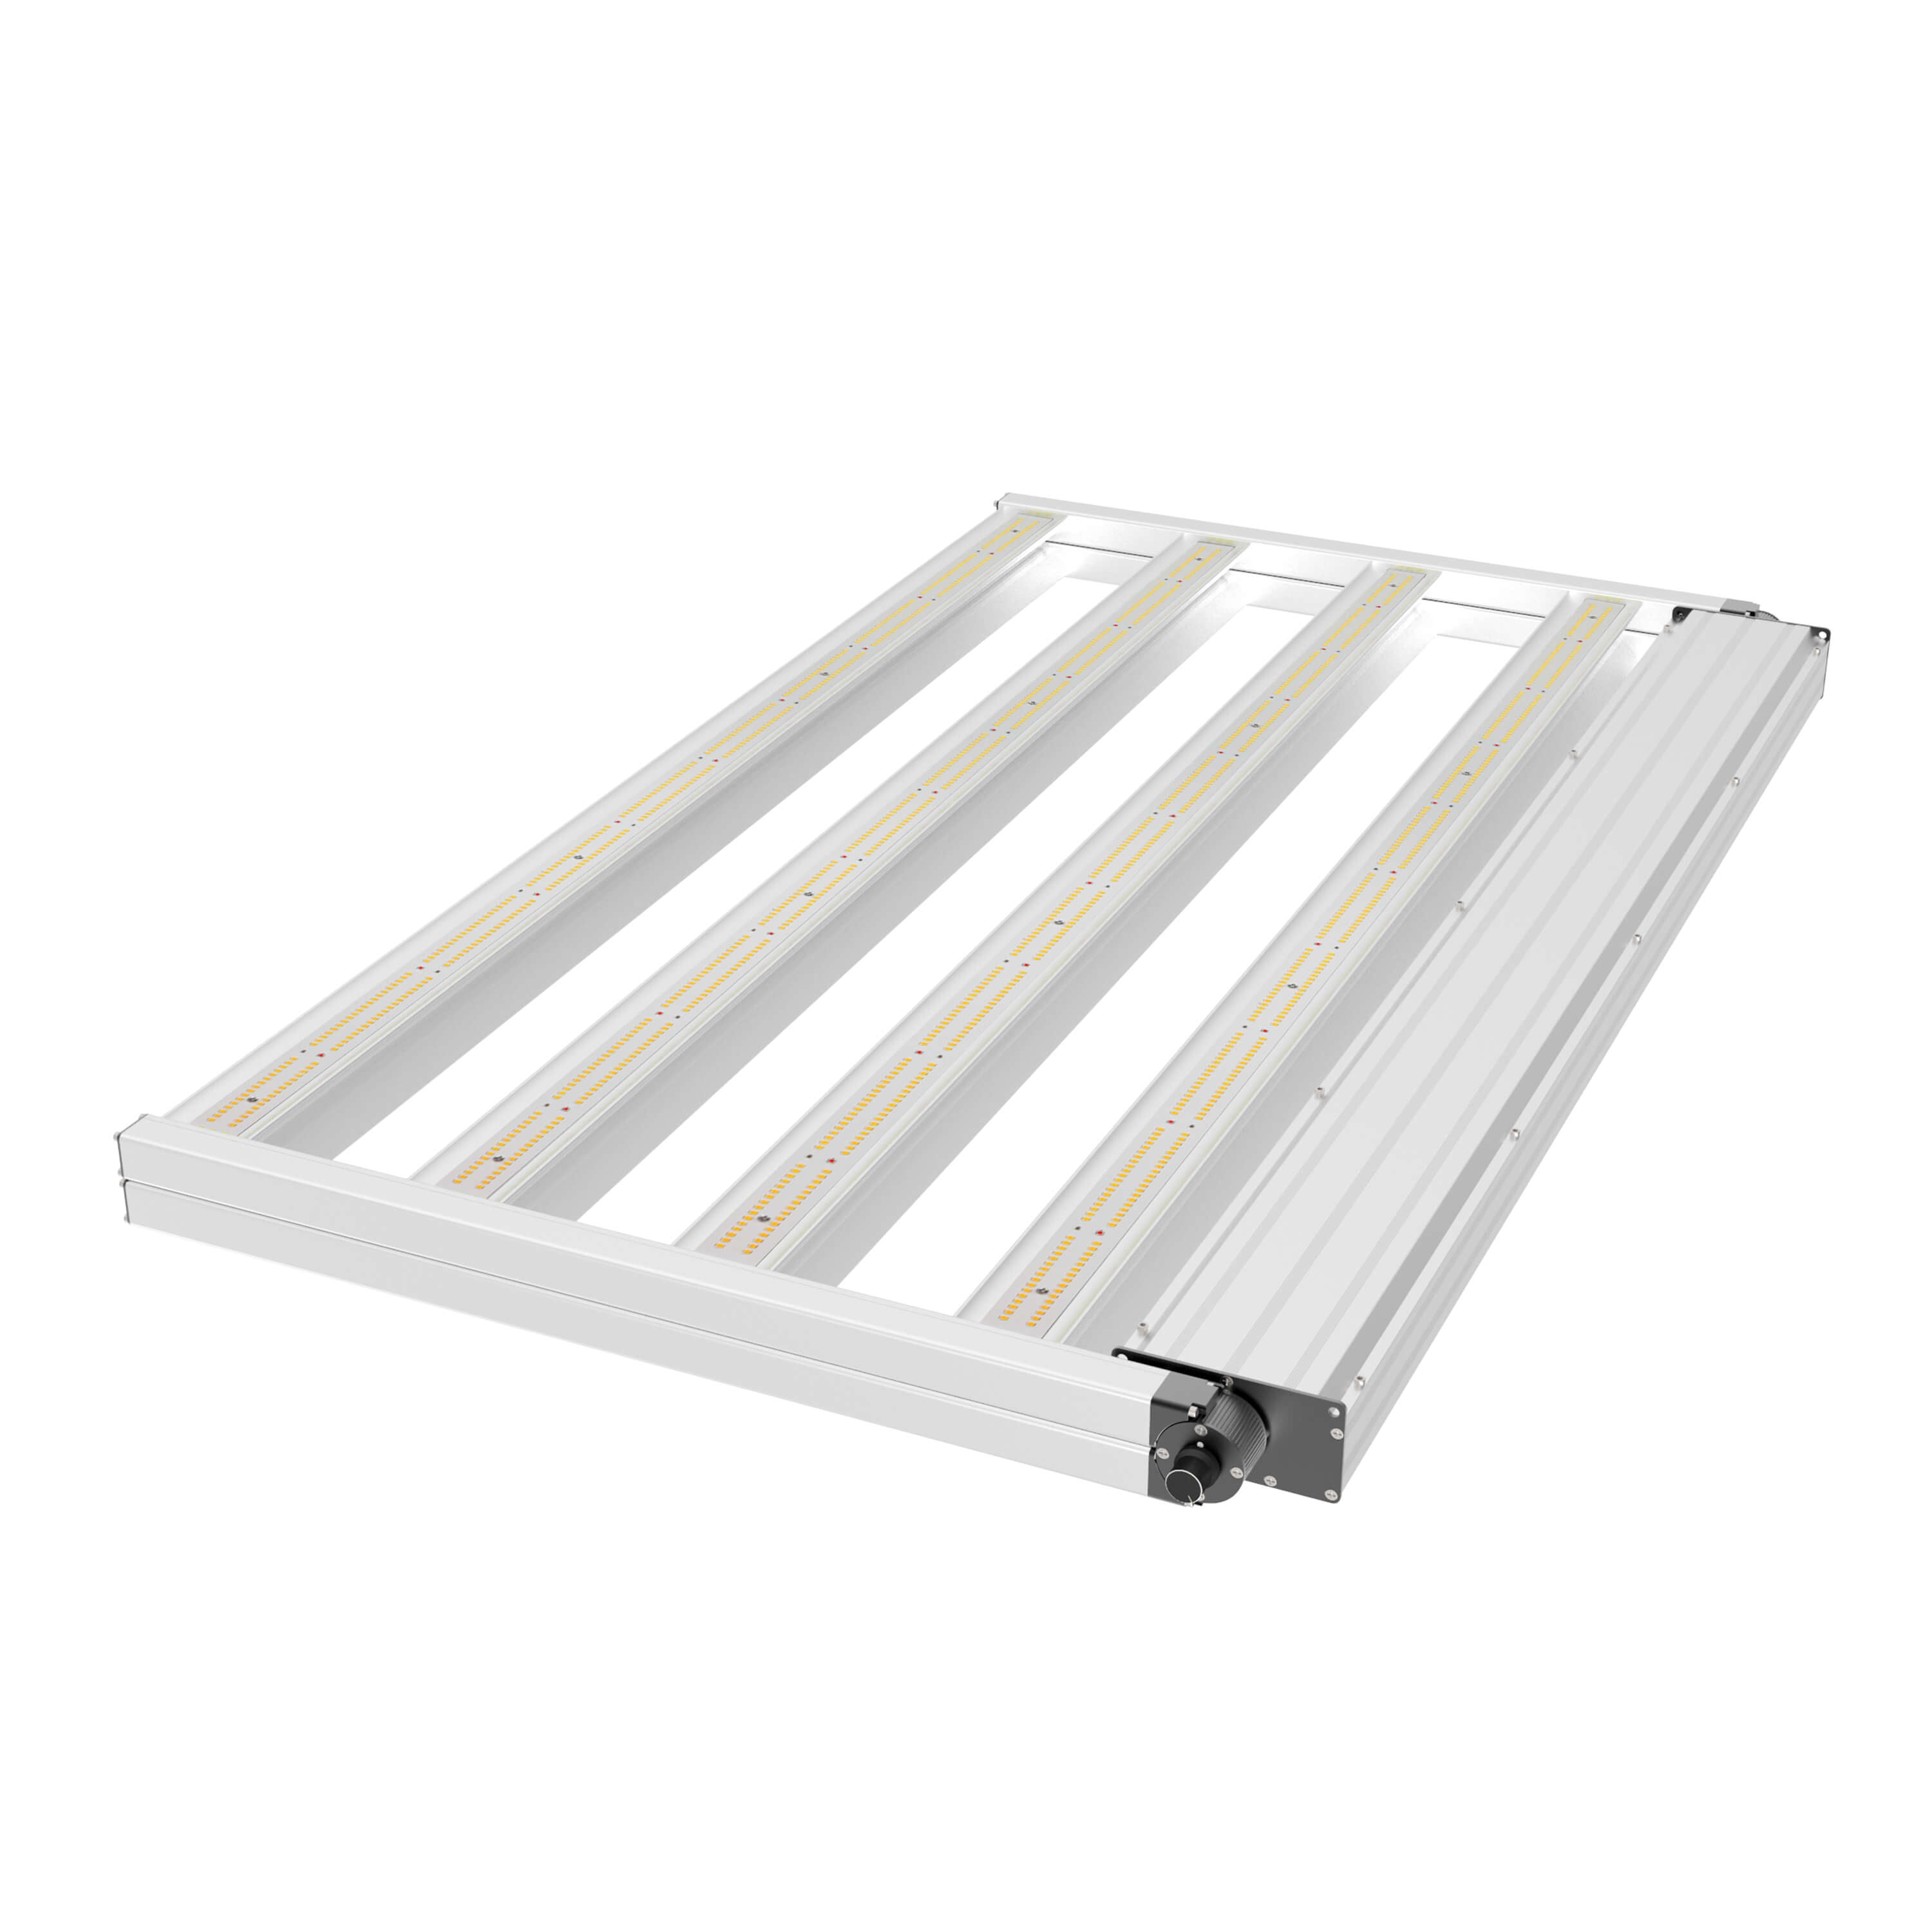 CT-720 Full Spectrum LED Grow Light - 720 Watts, 5'x5'/6'x6', Dimmable, High Efficacy, Commercial Use | Cultiuana-6